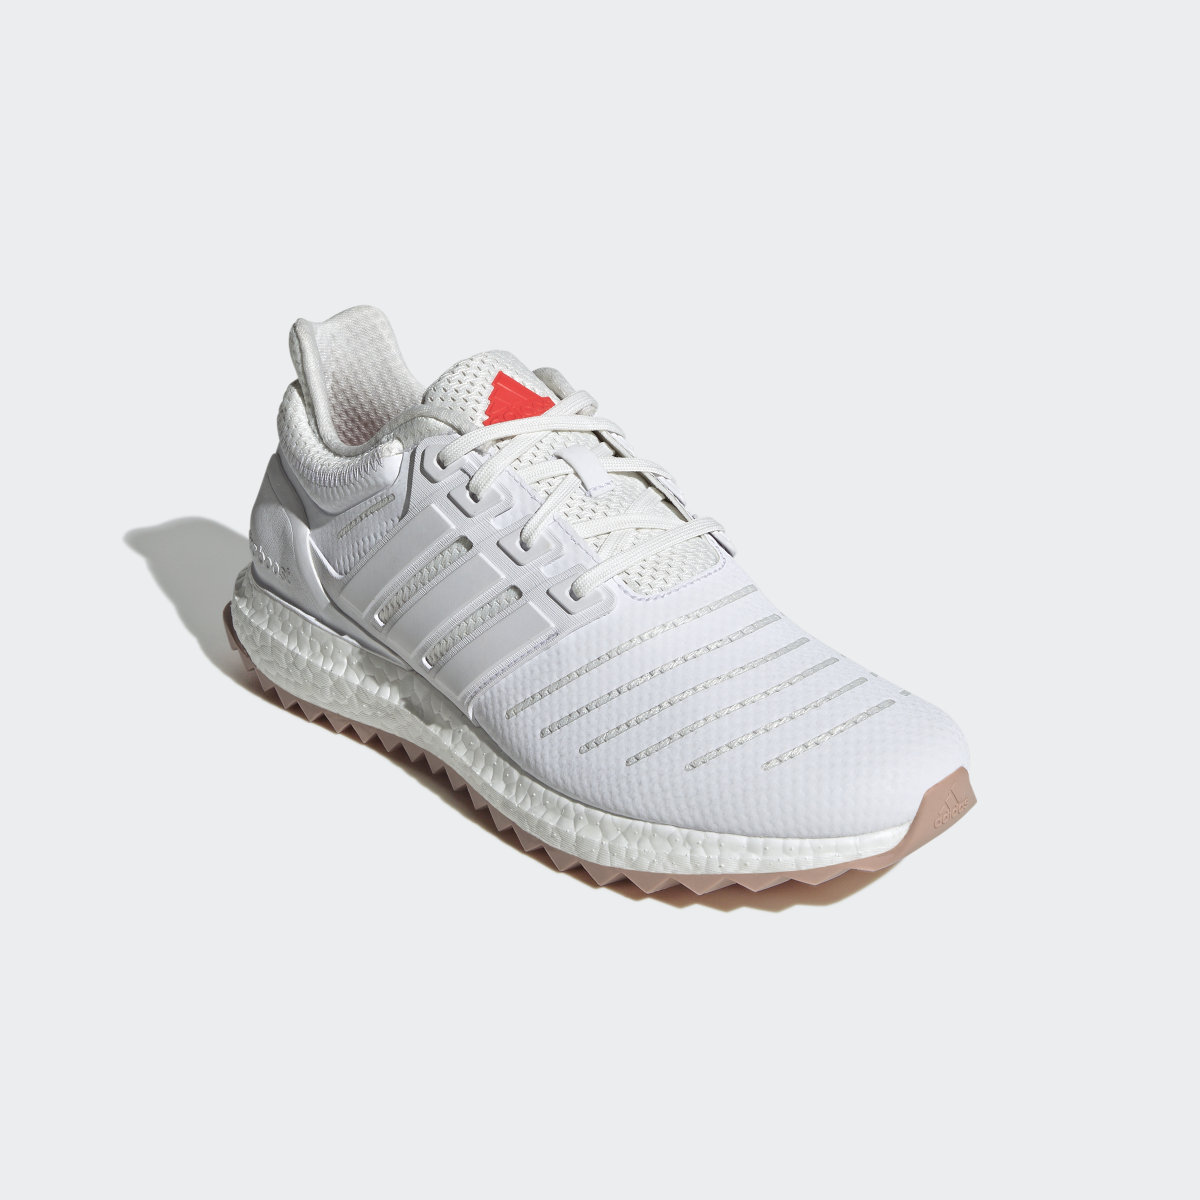 Adidas Chaussure Ultraboost DNA XXII Lifestyle Running Sportswear Capsule Collection. 5